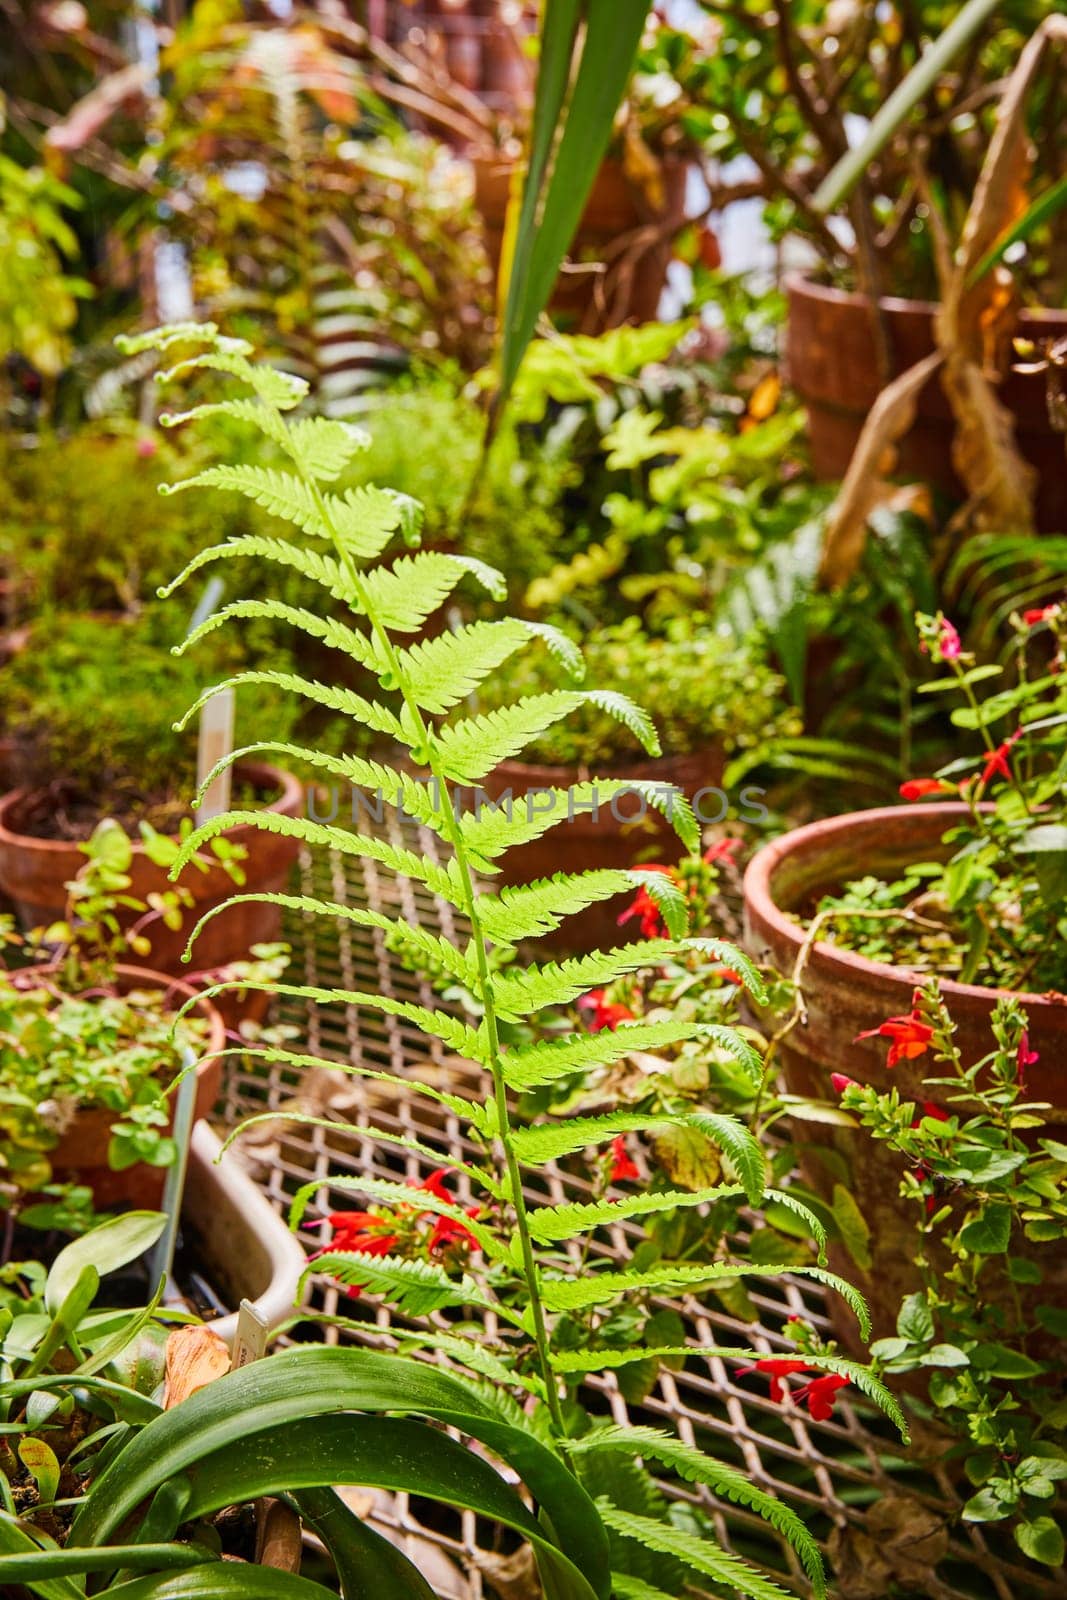 Lush Greenhouse Scene with Vibrant Fern in Muncie, Indiana Conservatory, Symbolizing Growth and Vitality